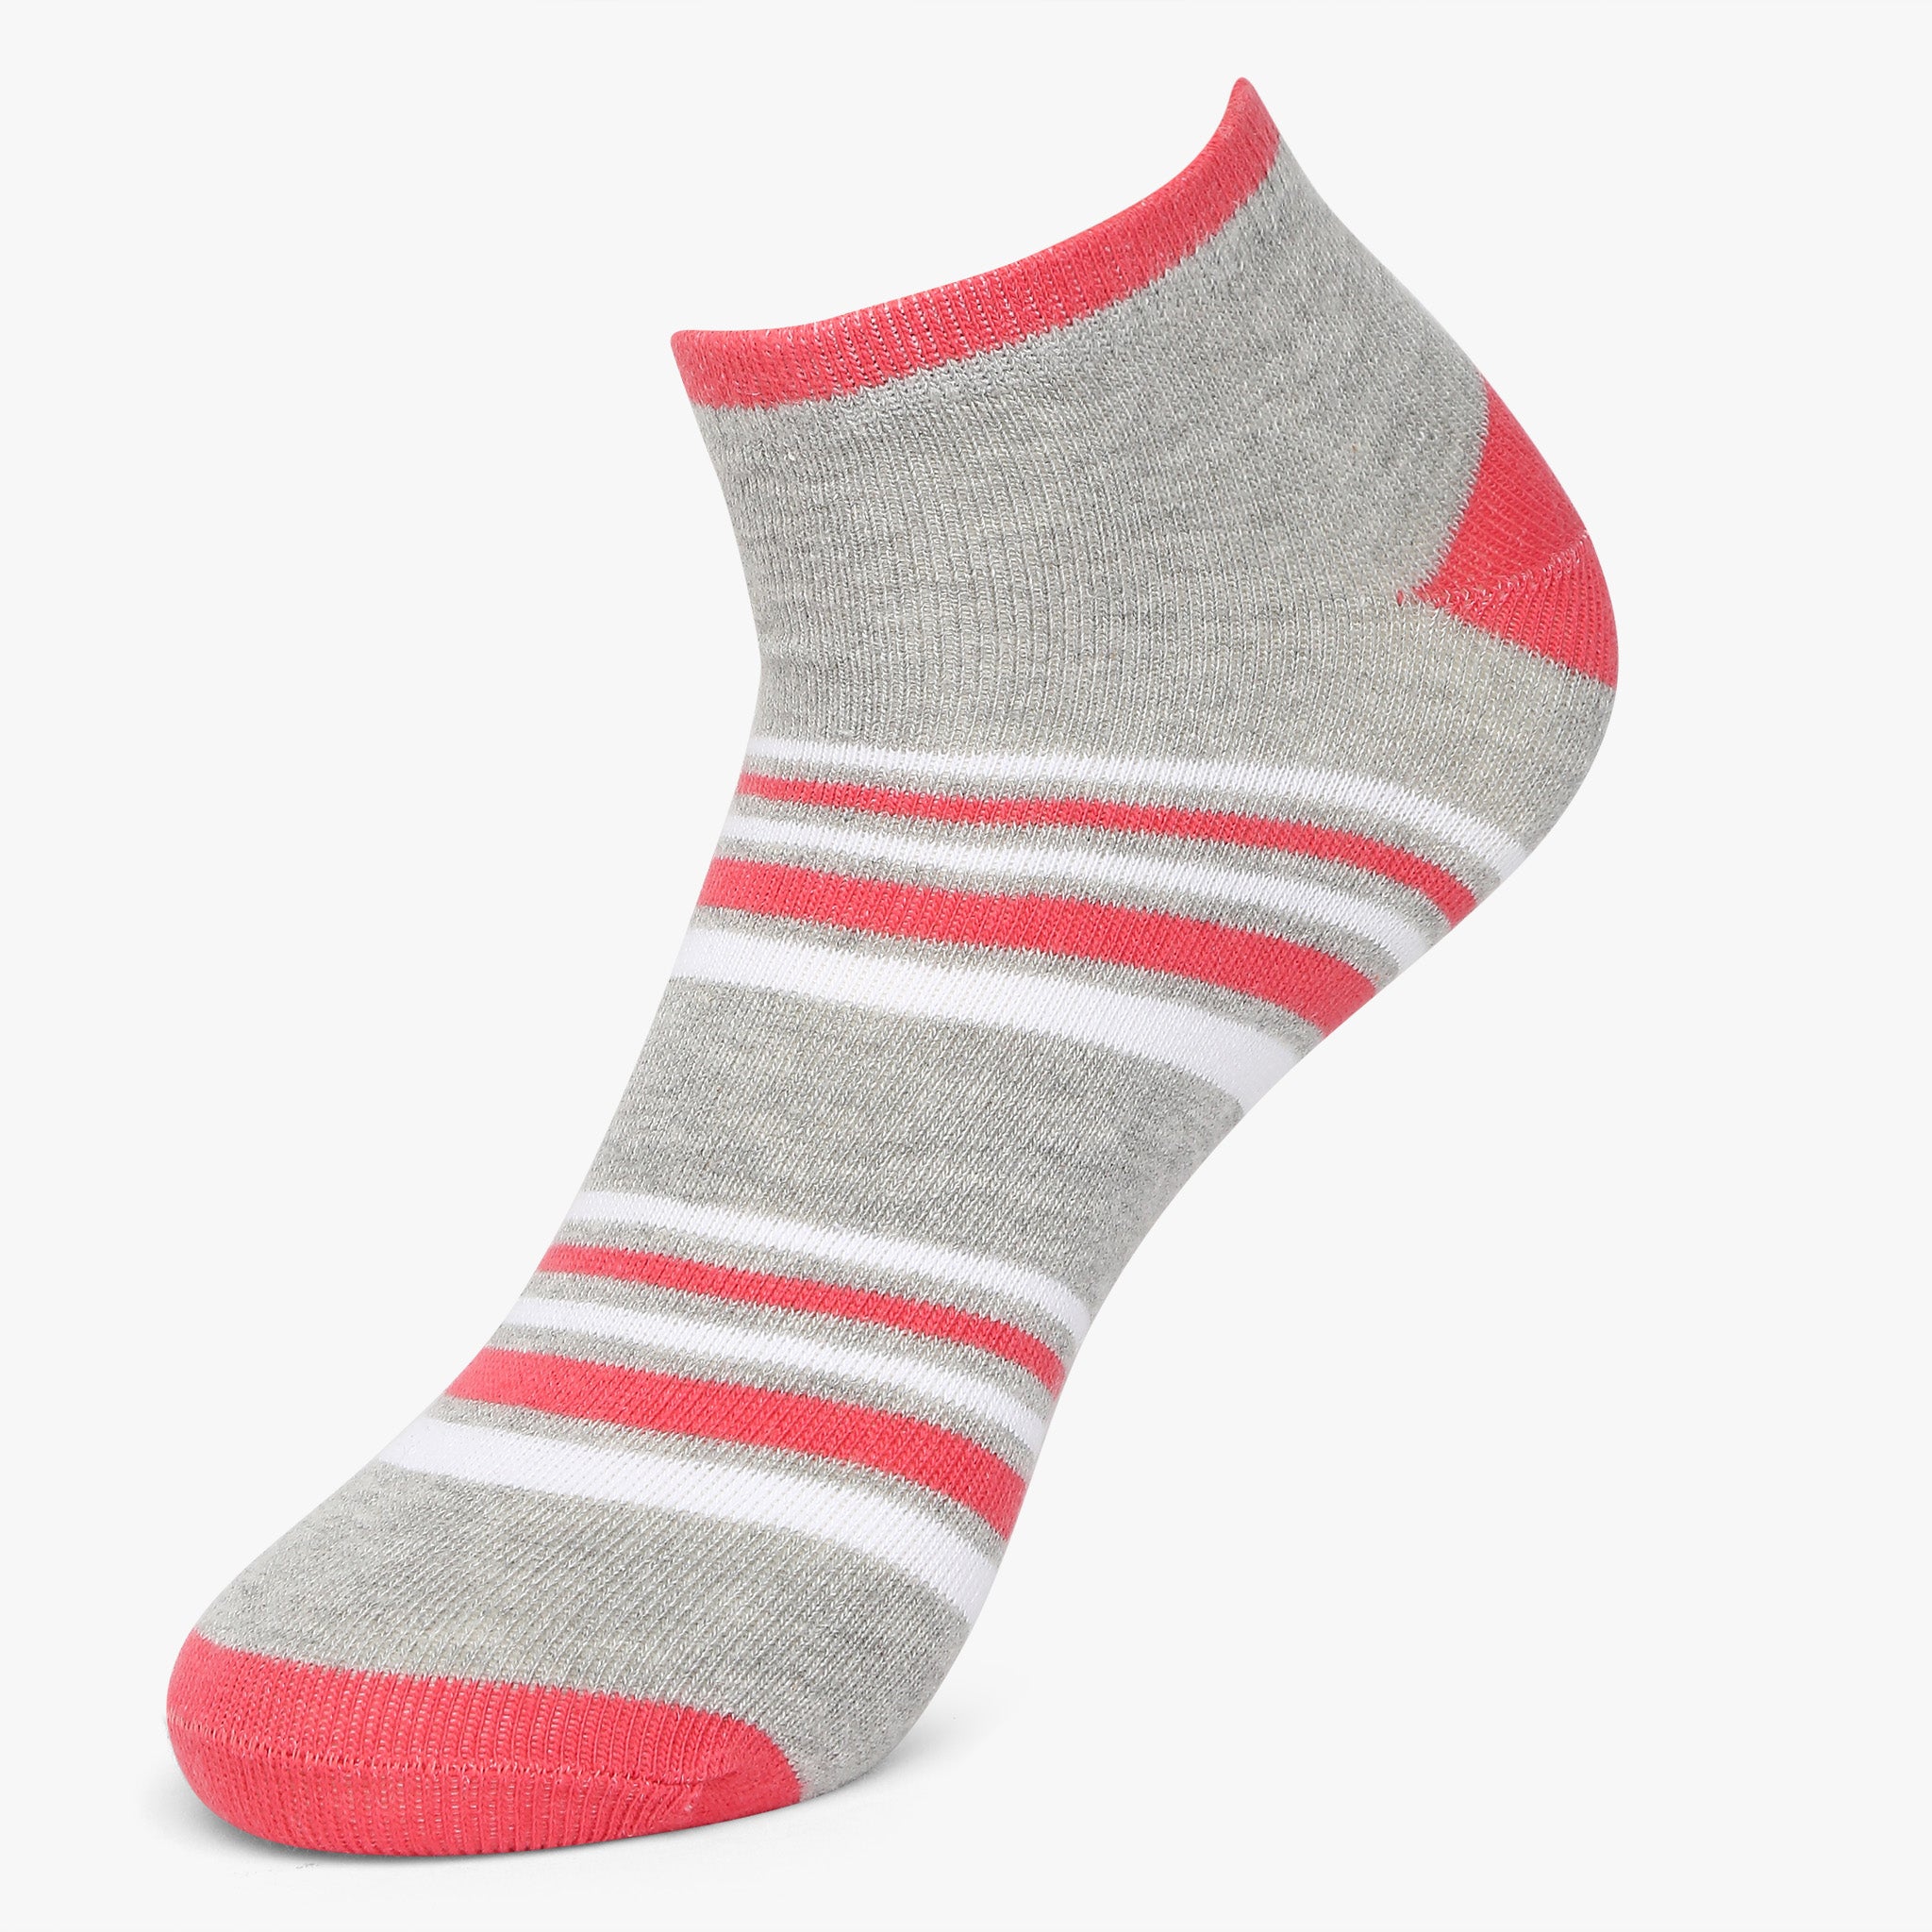 Womens Cotton Striped Socks (Pack of 2)